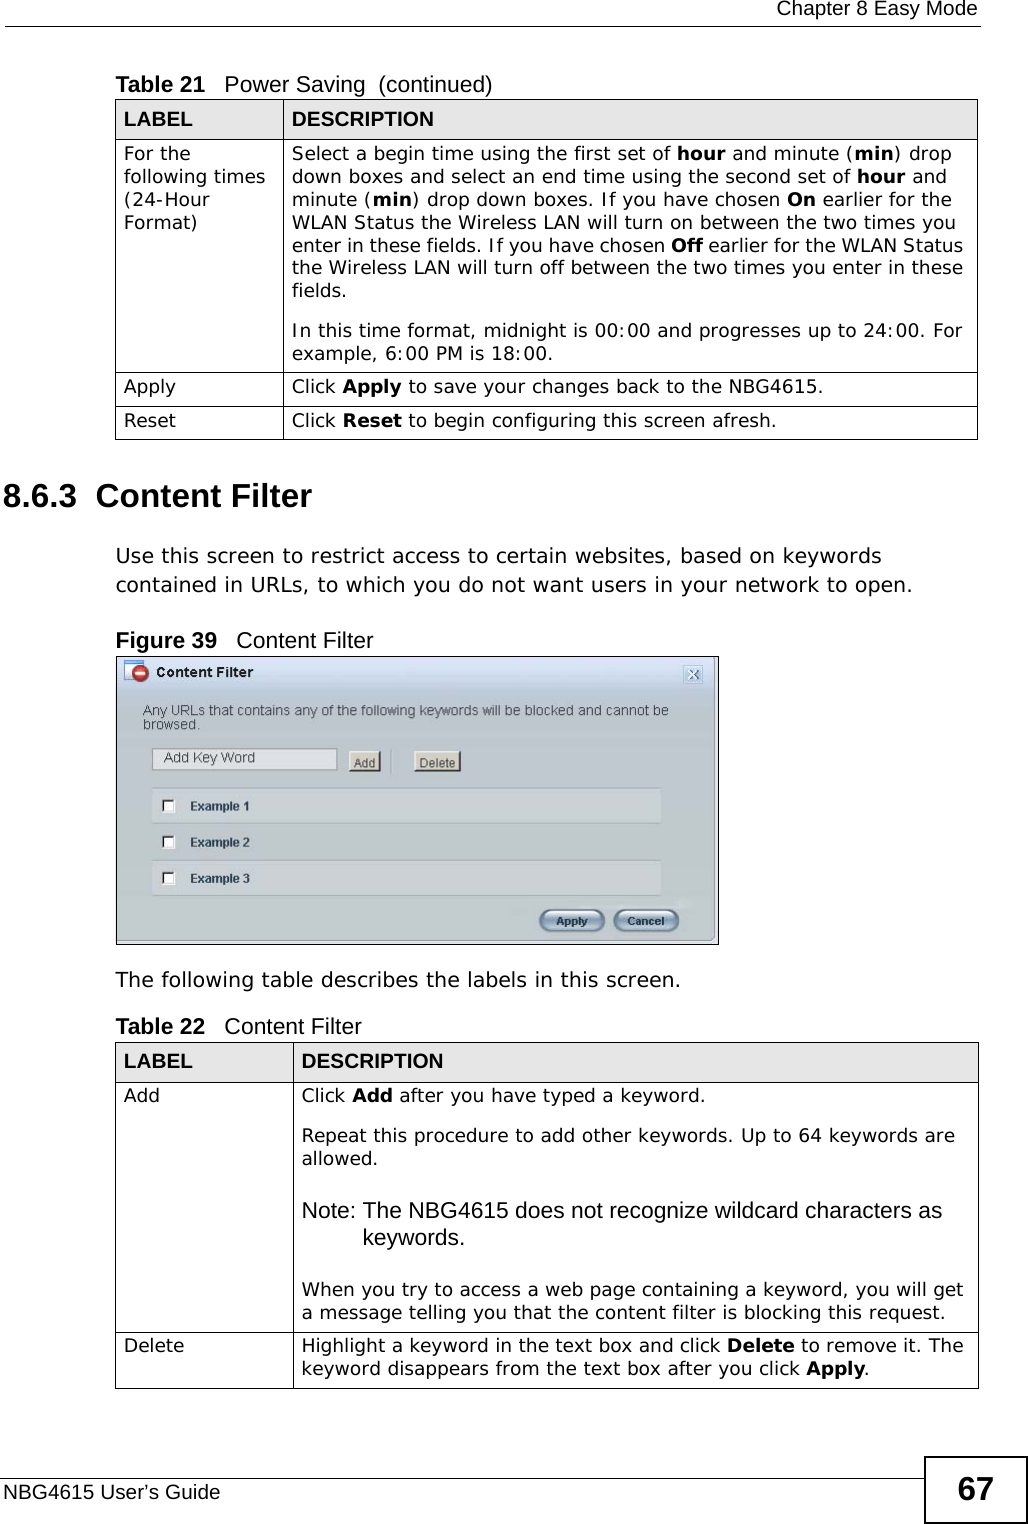  Chapter 8 Easy ModeNBG4615 User’s Guide 678.6.3  Content FilterUse this screen to restrict access to certain websites, based on keywords contained in URLs, to which you do not want users in your network to open.Figure 39   Content Filter The following table describes the labels in this screen.For the following times (24-Hour Format)Select a begin time using the first set of hour and minute (min) drop down boxes and select an end time using the second set of hour and minute (min) drop down boxes. If you have chosen On earlier for the WLAN Status the Wireless LAN will turn on between the two times you enter in these fields. If you have chosen Off earlier for the WLAN Status the Wireless LAN will turn off between the two times you enter in these fields. In this time format, midnight is 00:00 and progresses up to 24:00. For example, 6:00 PM is 18:00.Apply Click Apply to save your changes back to the NBG4615.Reset Click Reset to begin configuring this screen afresh.Table 21   Power Saving  (continued)LABEL DESCRIPTIONTable 22   Content FilterLABEL DESCRIPTIONAdd  Click Add after you have typed a keyword. Repeat this procedure to add other keywords. Up to 64 keywords are allowed.Note: The NBG4615 does not recognize wildcard characters as keywords. When you try to access a web page containing a keyword, you will get a message telling you that the content filter is blocking this request.Delete Highlight a keyword in the text box and click Delete to remove it. The keyword disappears from the text box after you click Apply.